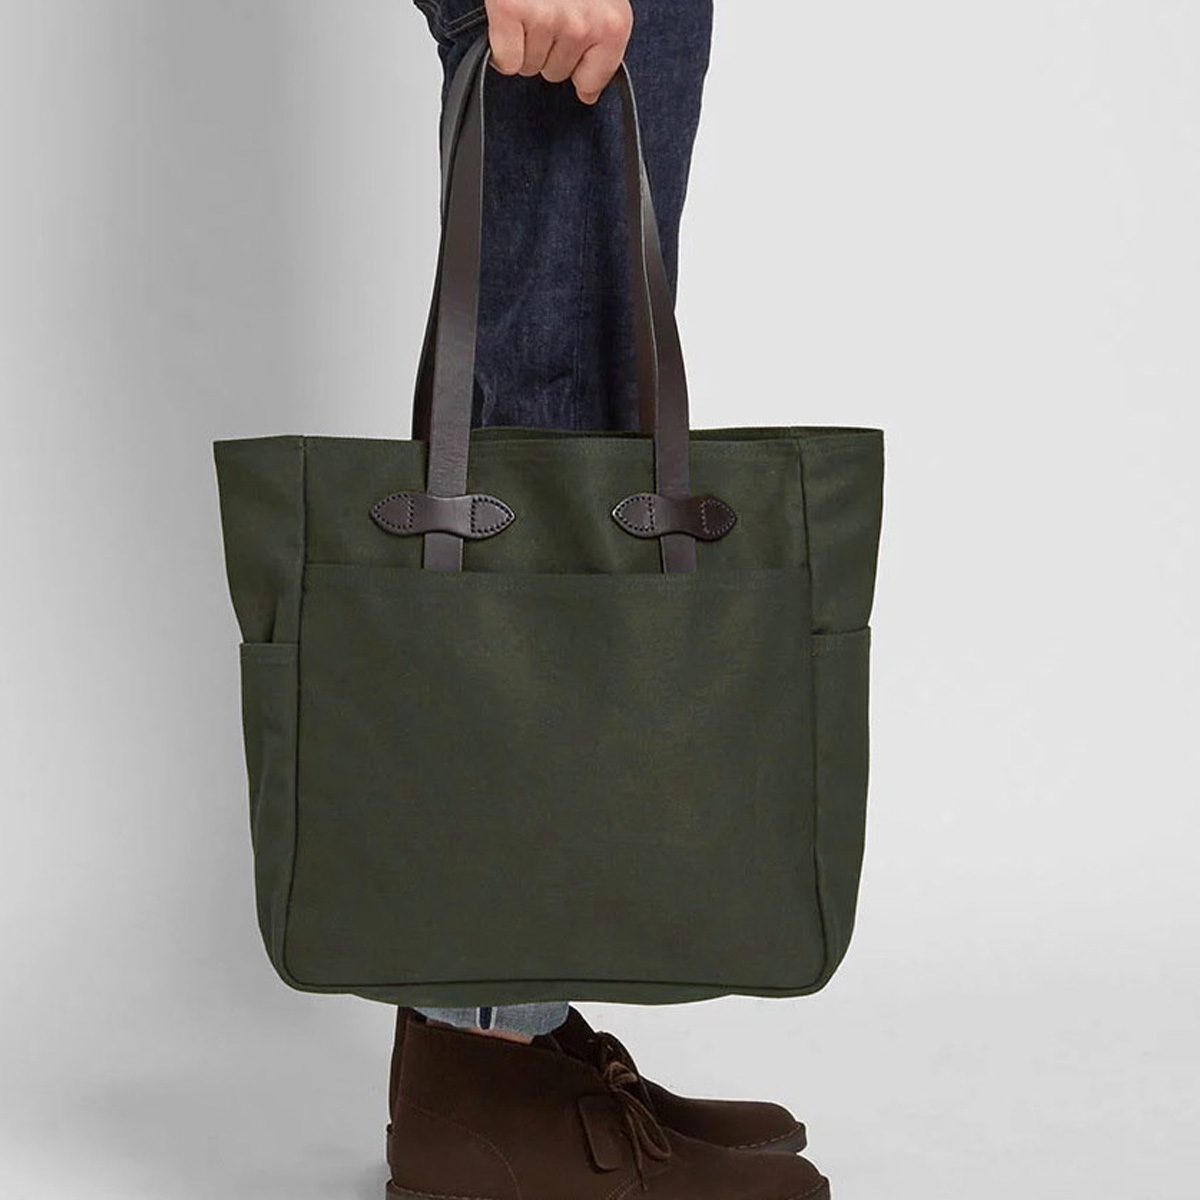 Filson Tote bag with zipper Otter Green, classic-looking shopper